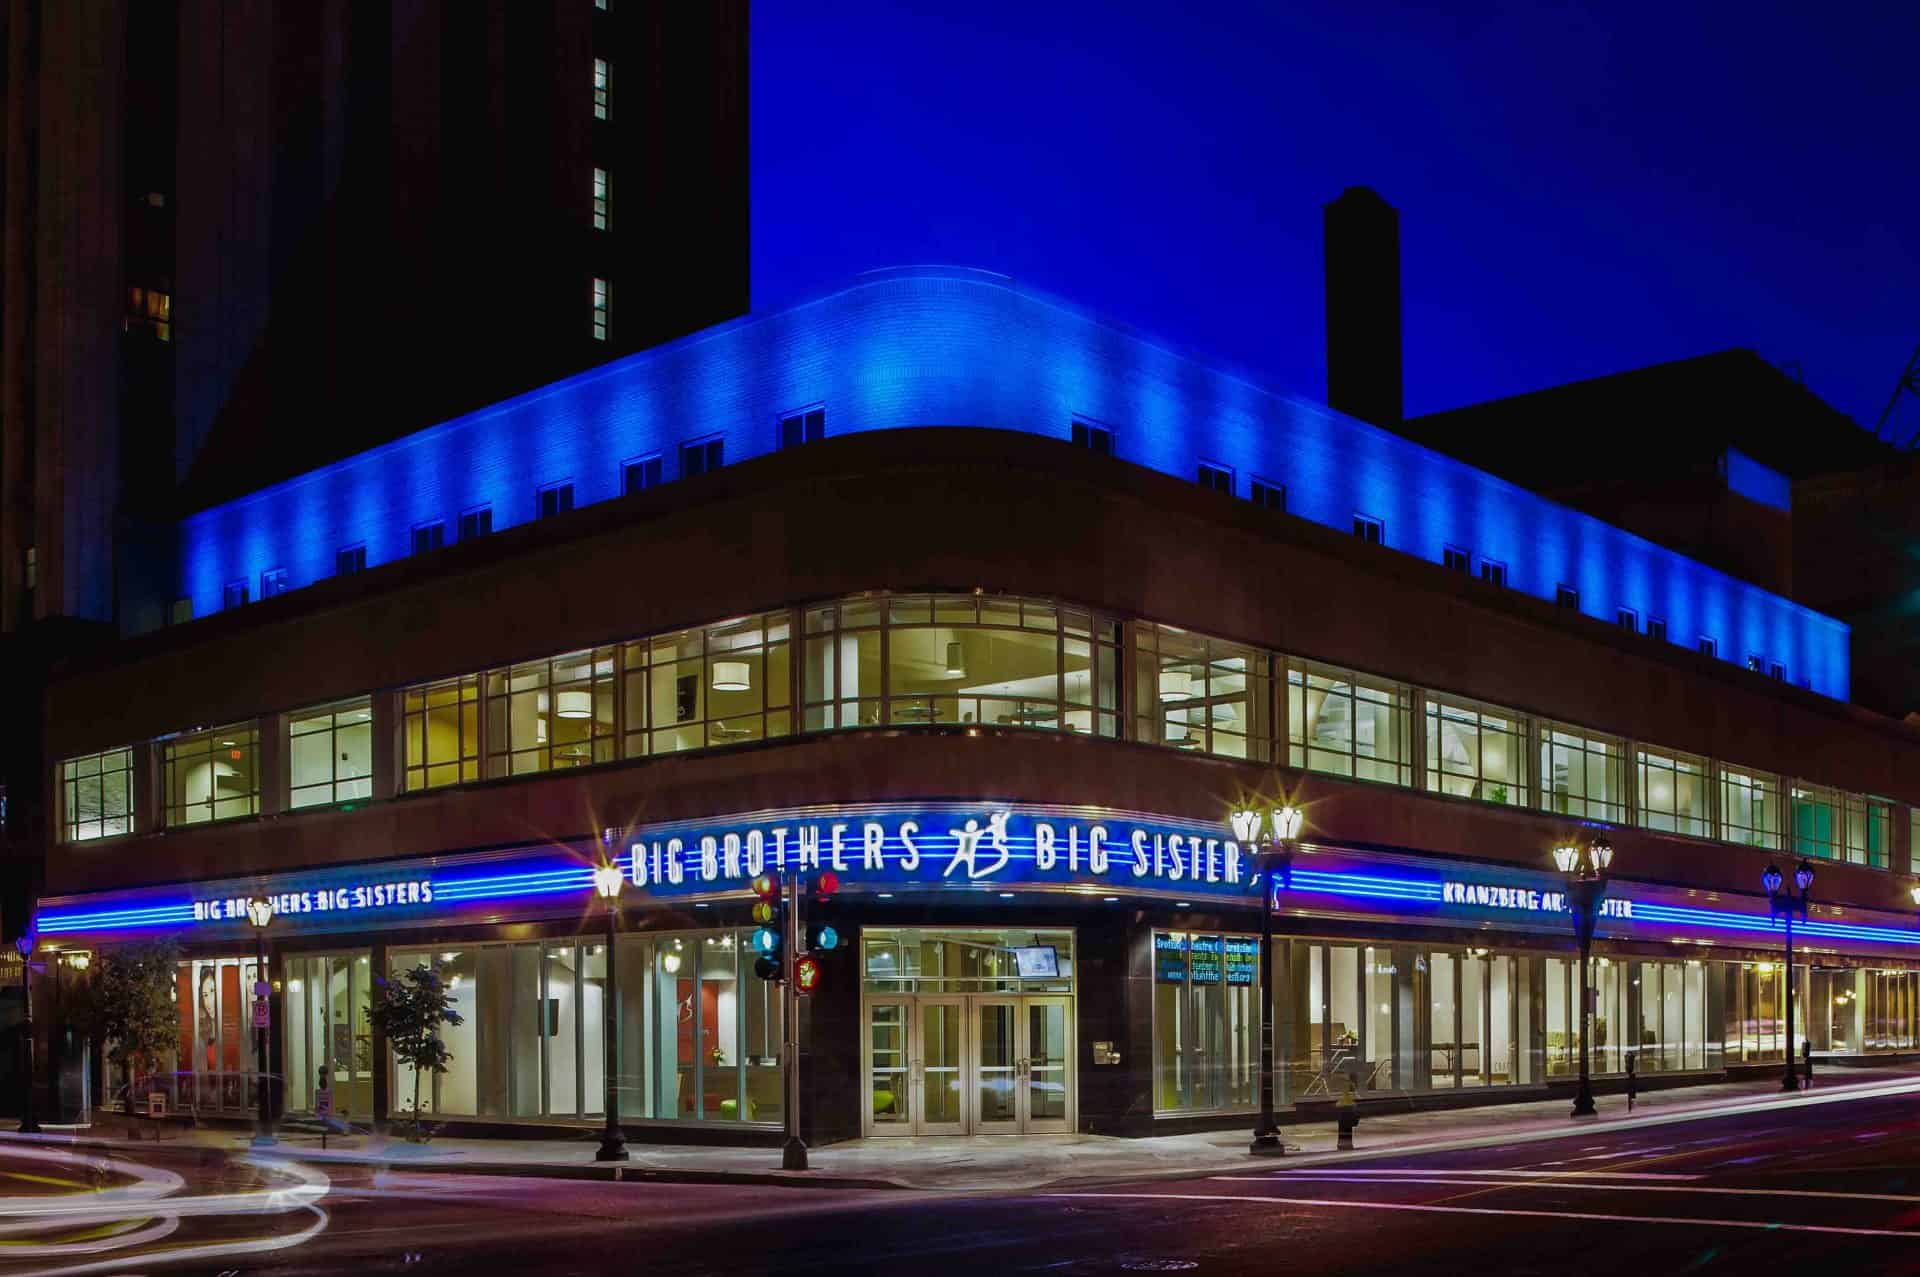 Blue Neon Building Signs for Big Bothers Big Sisters Nonprofit